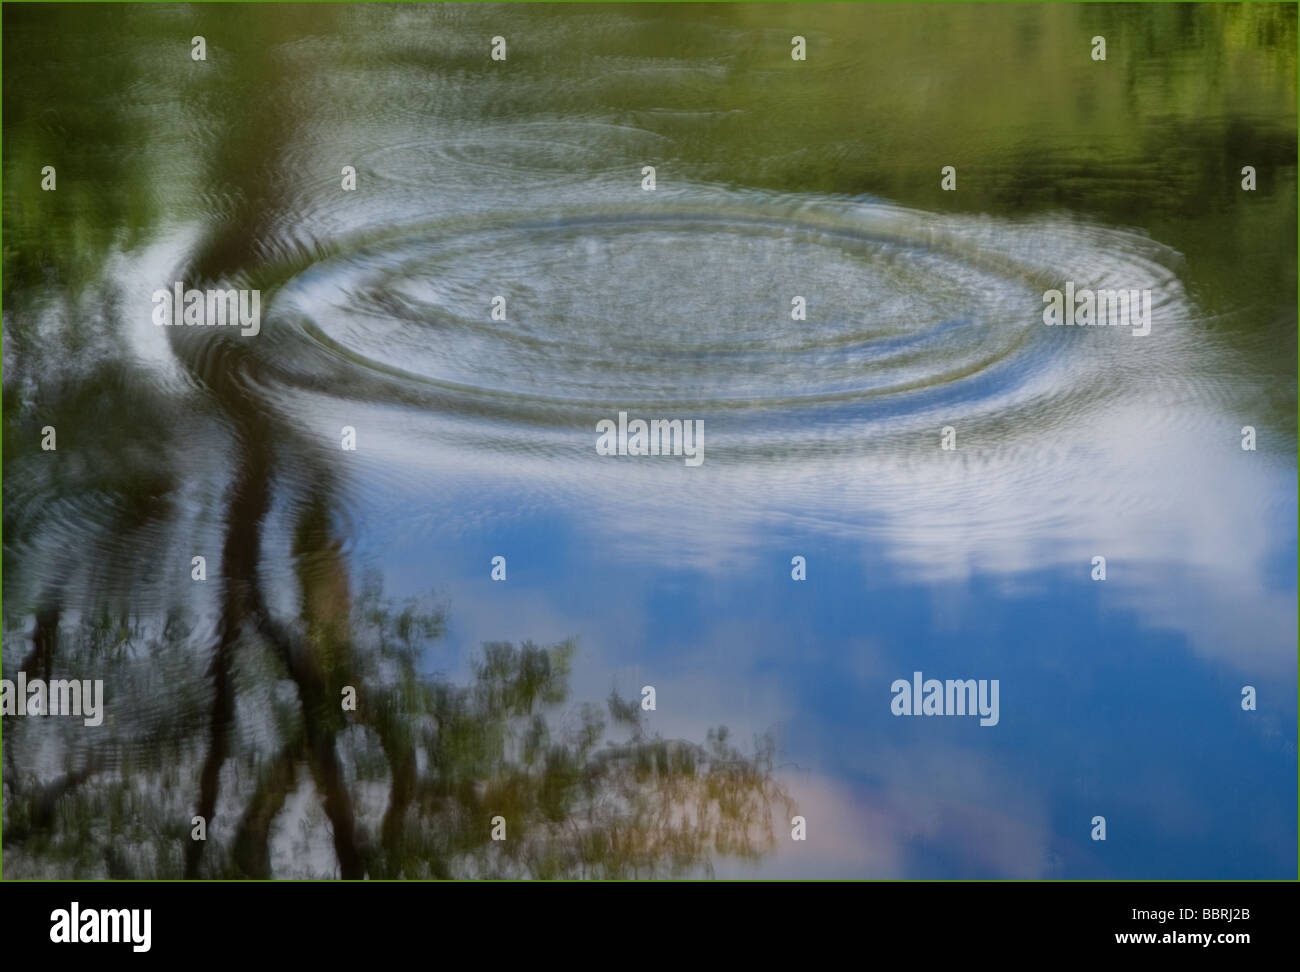 Ripple ring in water and tree reflection. Stock Photo